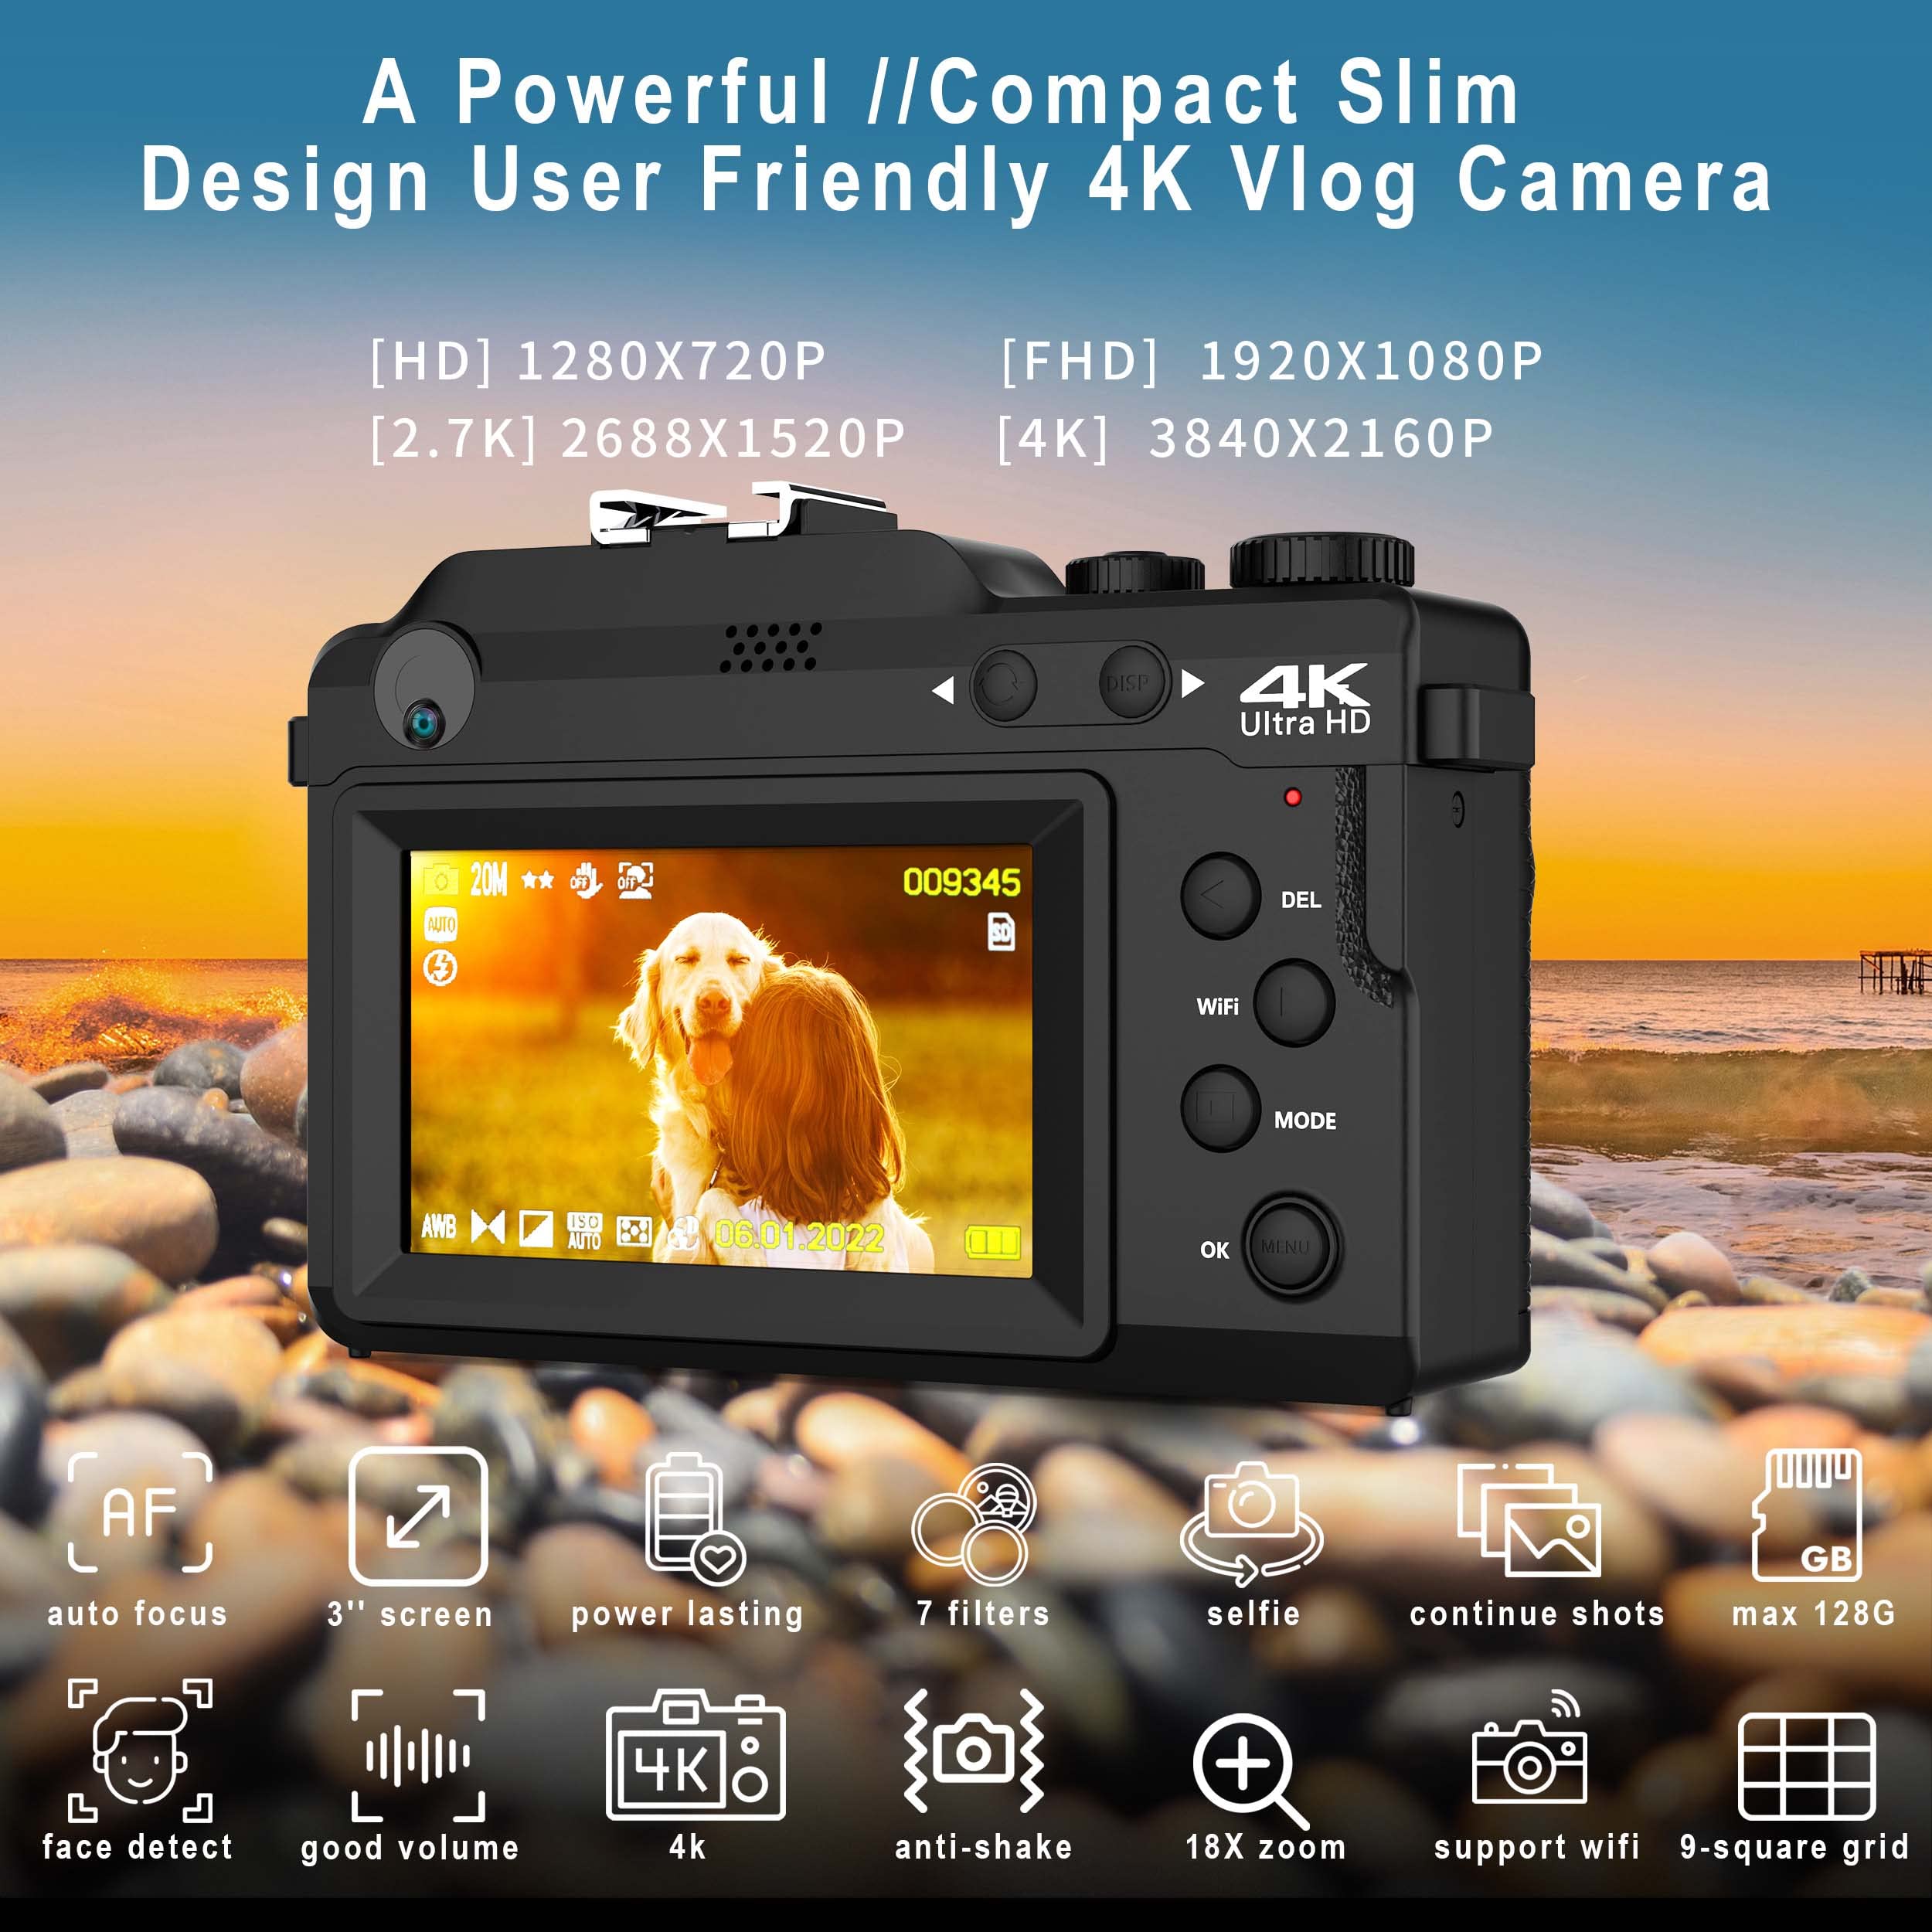 Vlogging Camera, 4K 48MP Digital Camera with WiFi, Free 32G TF Card & Hand Strap, Auto Focus & Anti-Shake, Built-in 7 Color Filters, Face Detect, 3'' IPS Screen, 140°Wide Angle, 18X Digital Zoom AC-10